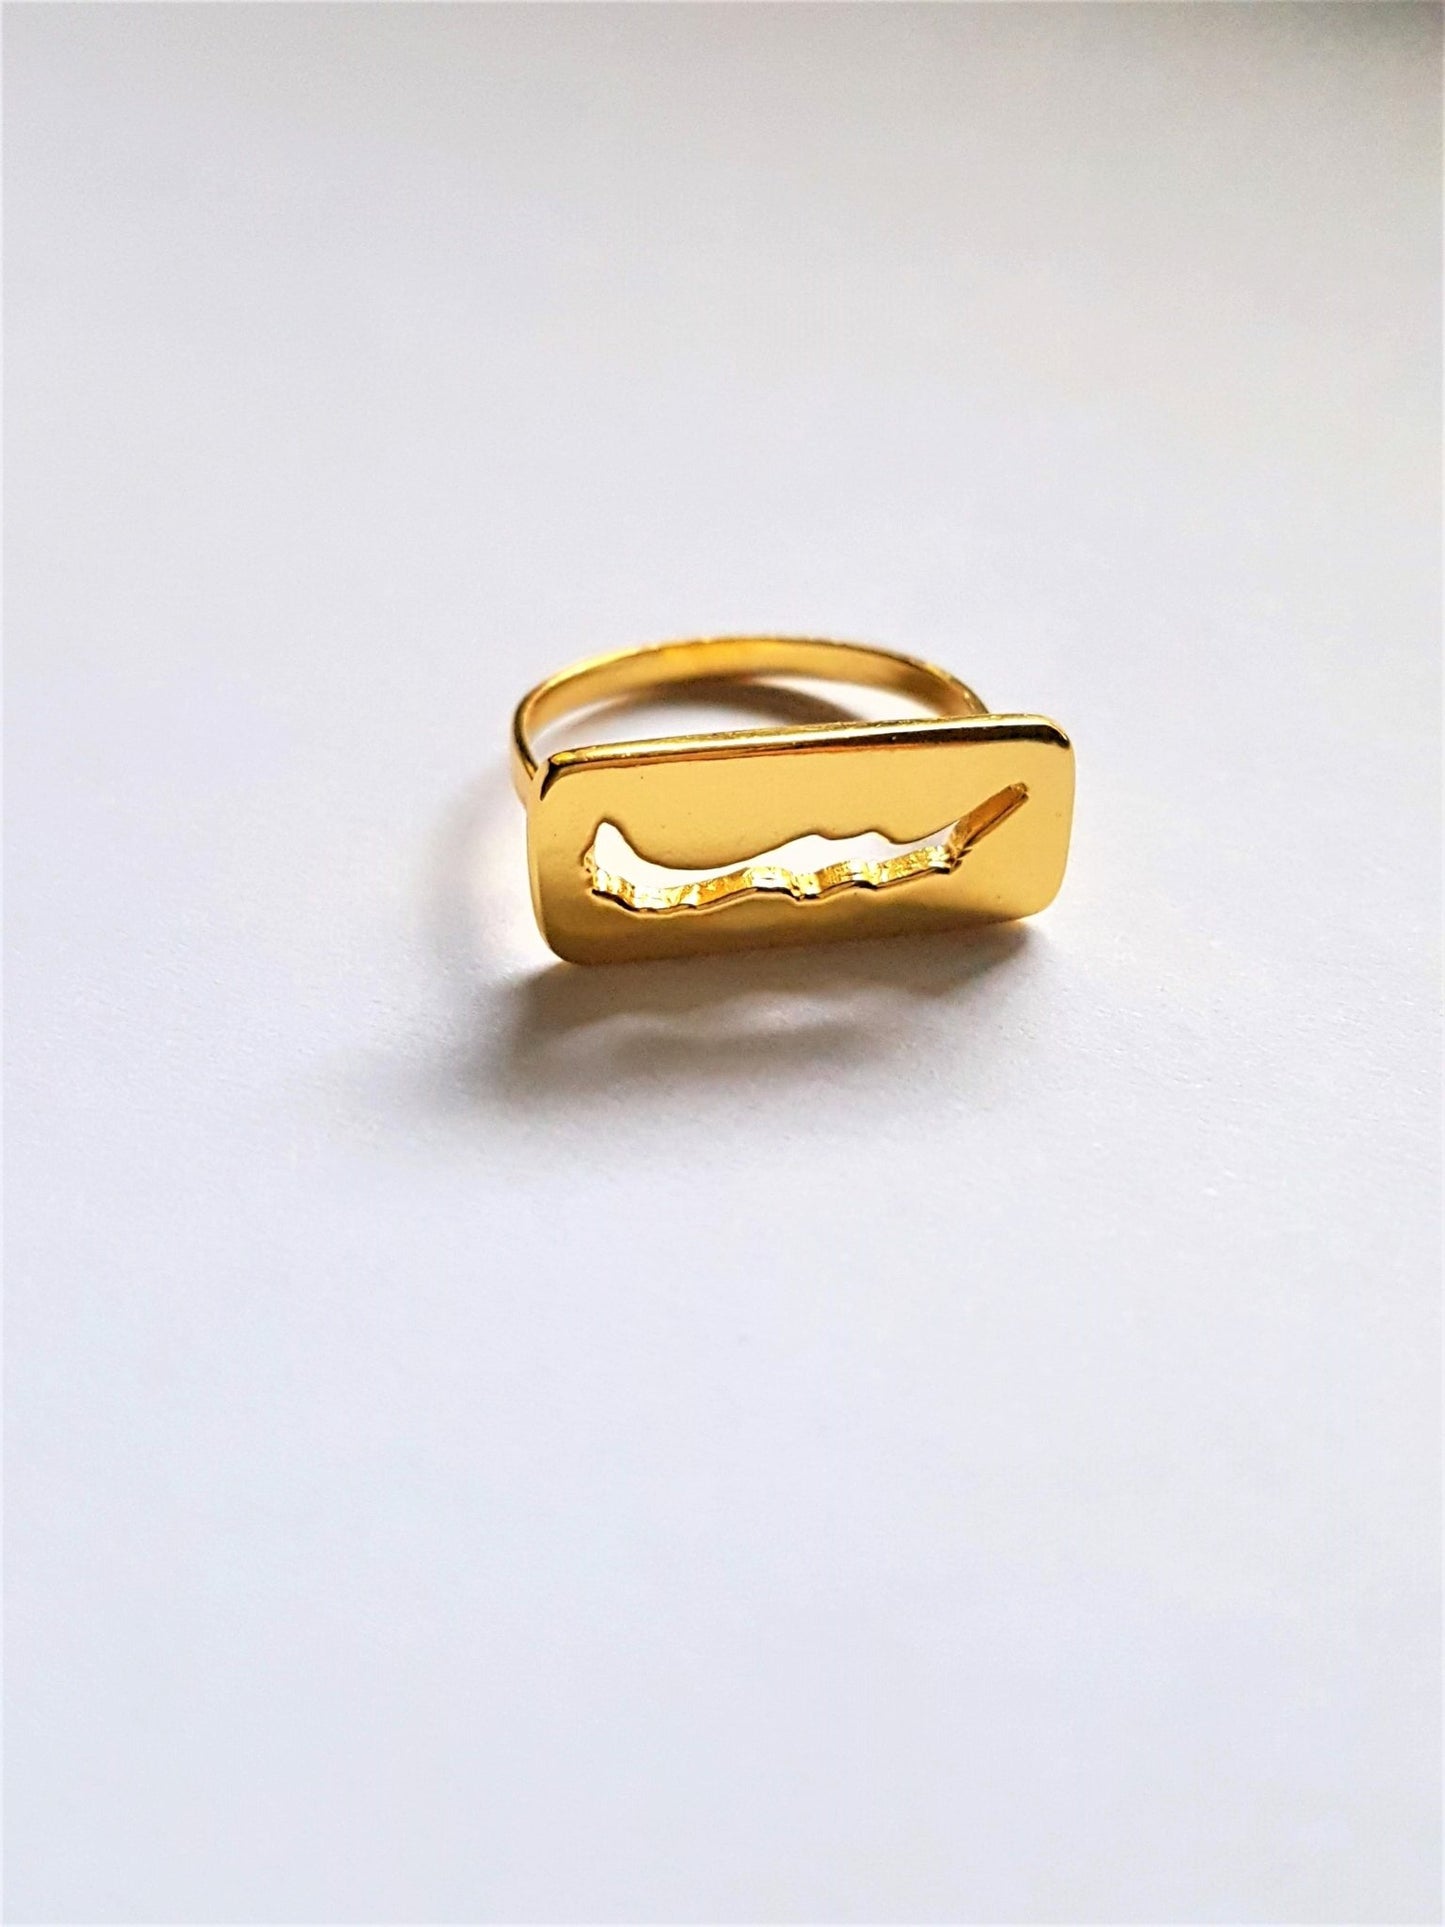 18k plated yellow gold - size 10 Savary island ring with savary island shape cut out of rectangle